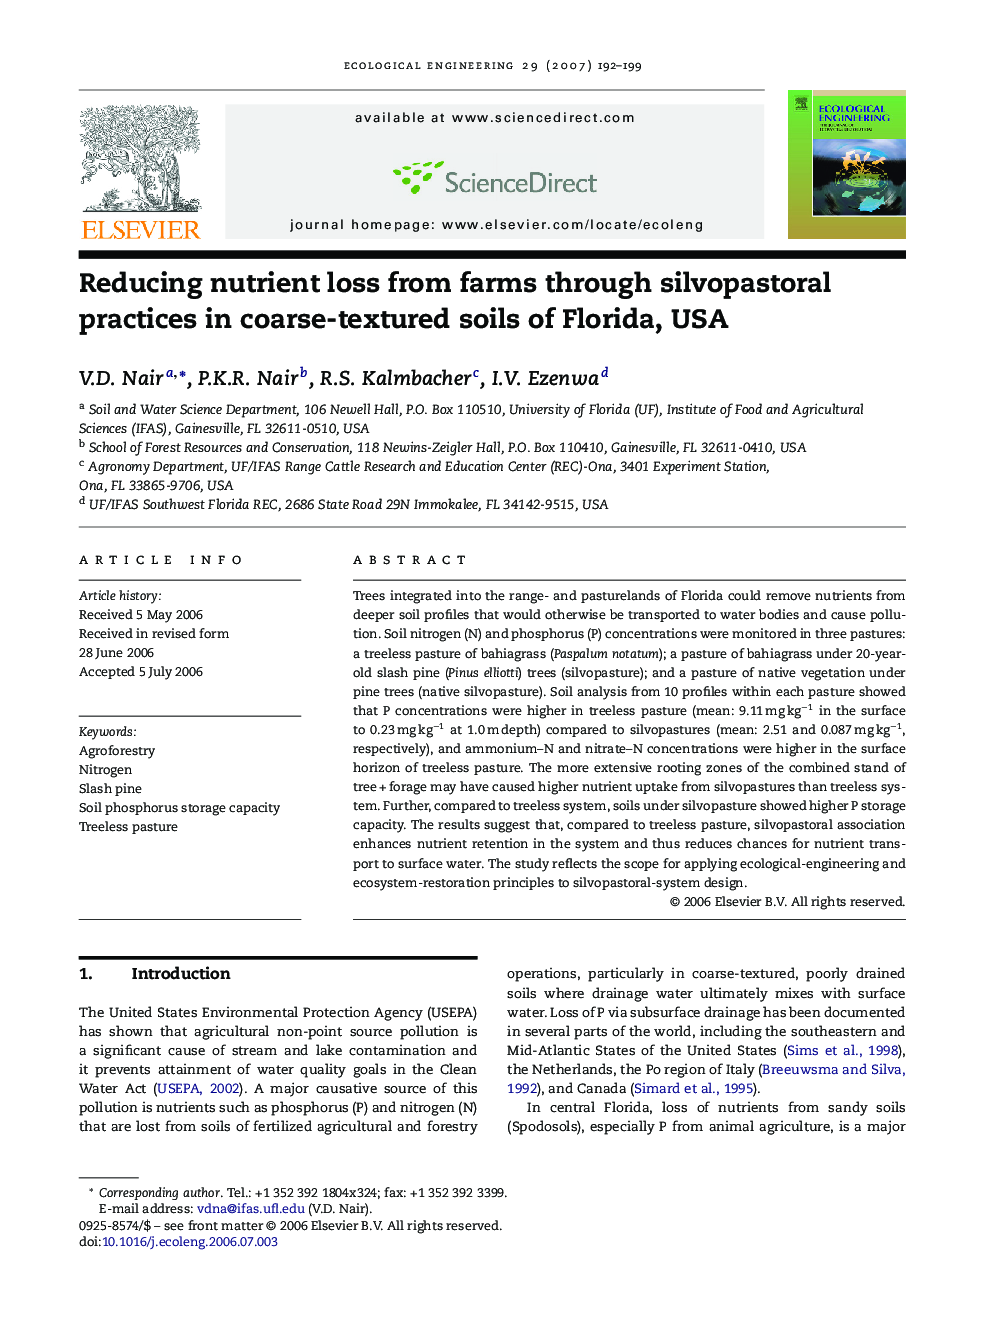 Reducing nutrient loss from farms through silvopastoral practices in coarse-textured soils of Florida, USA